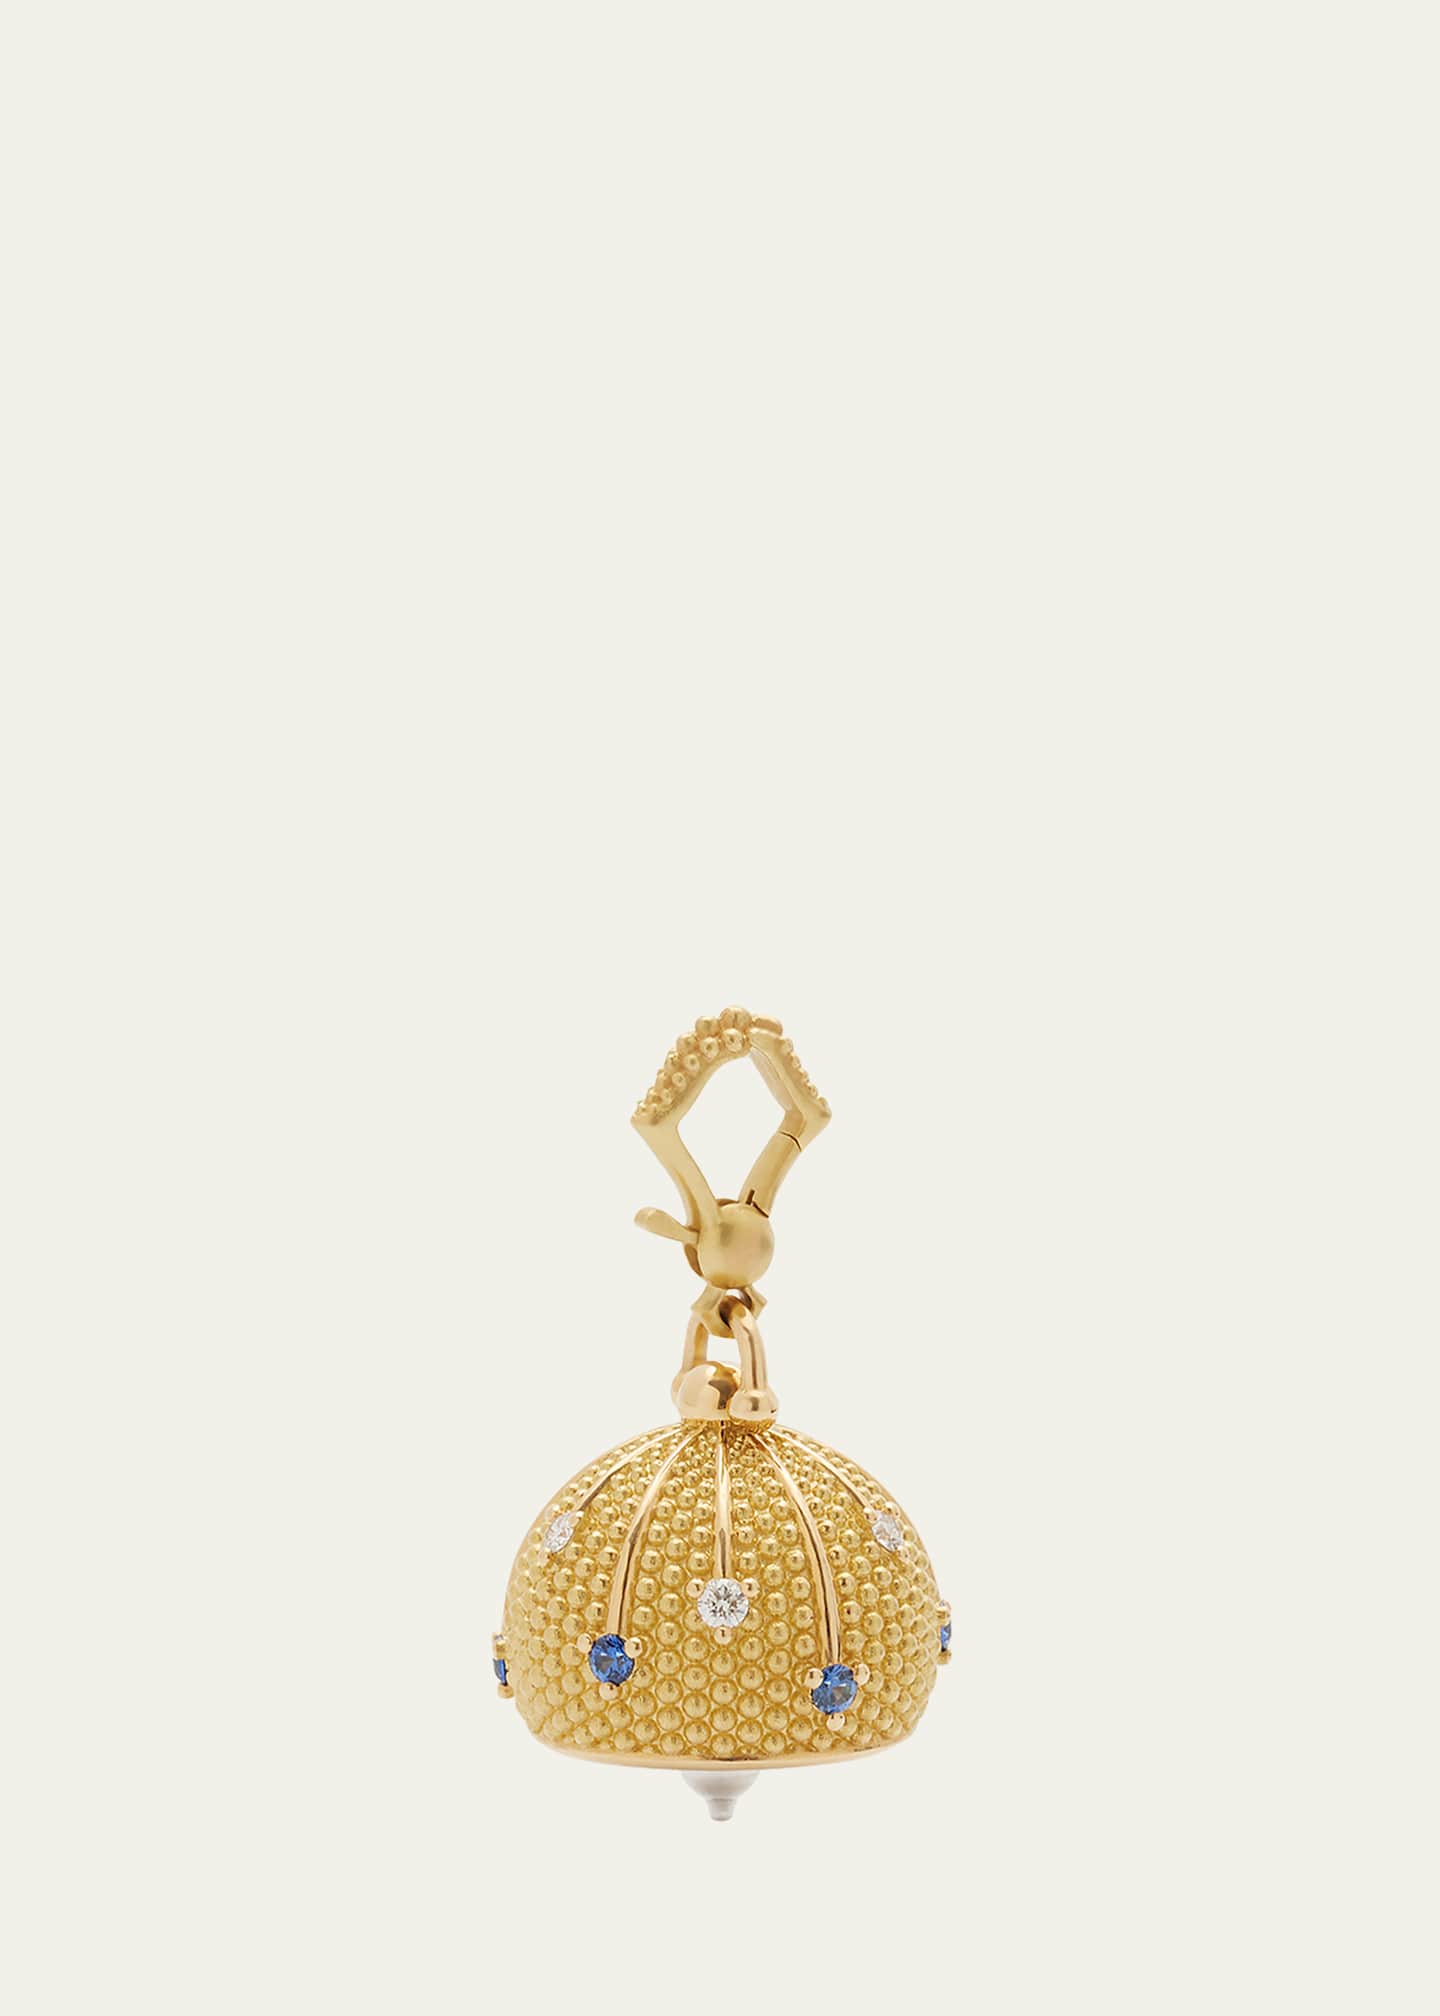 Thriller veiligheid Labe Paul Morelli Sequence Bell Charm with Diamonds and Blue Sapphires -  Bergdorf Goodman